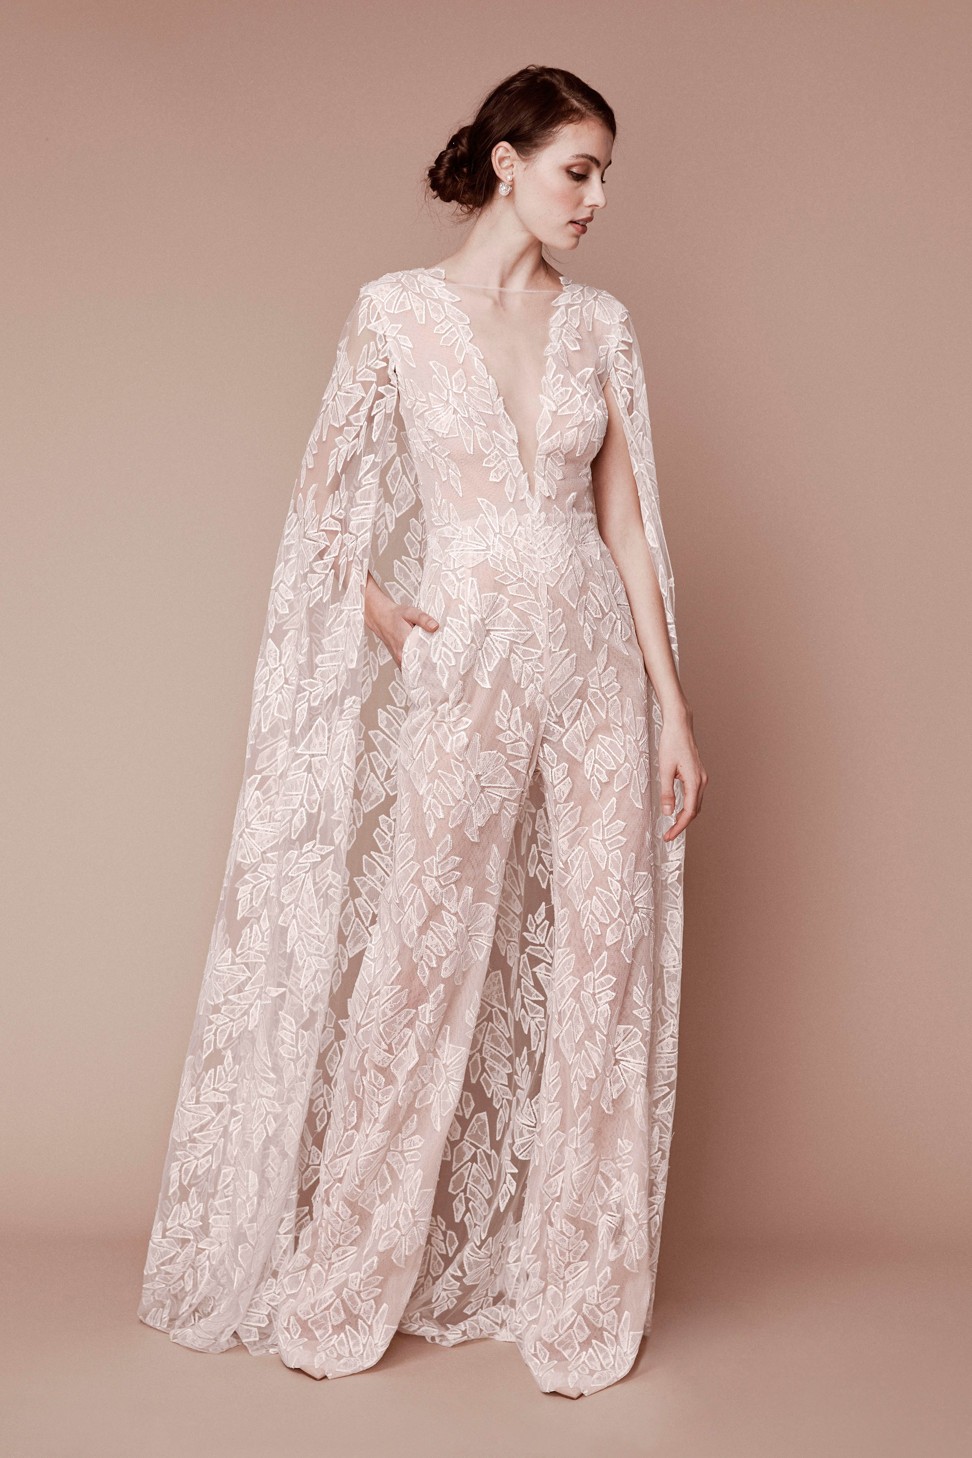 Tadashi Shoji’s 2019 collection includes an all-lace jumpsuit with a floor-length cape.